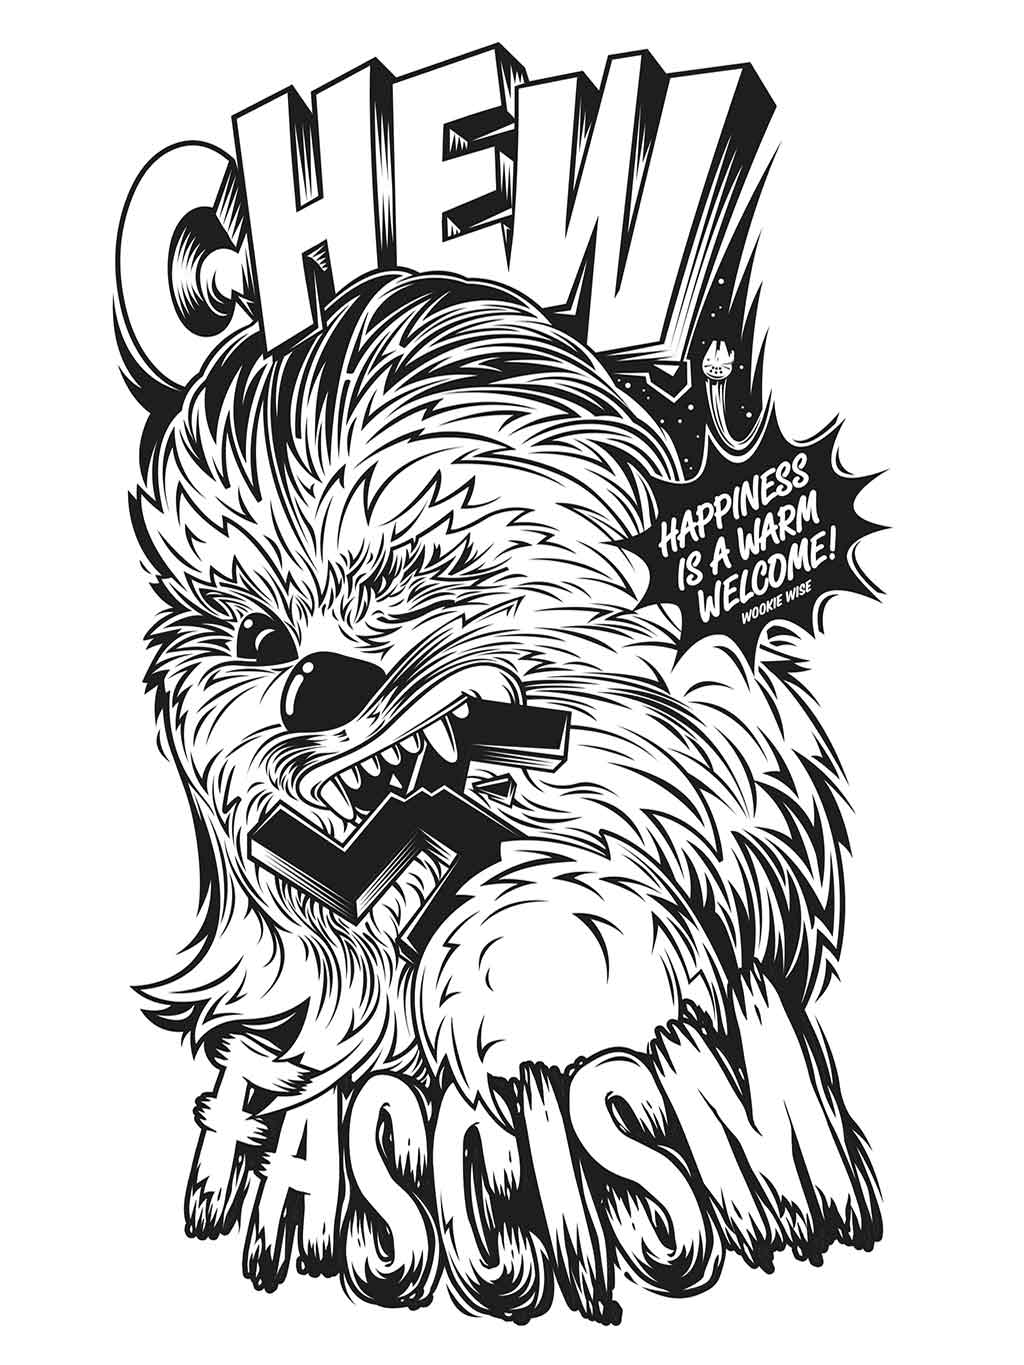 Chew Fascism - Happiness is warm Welcome